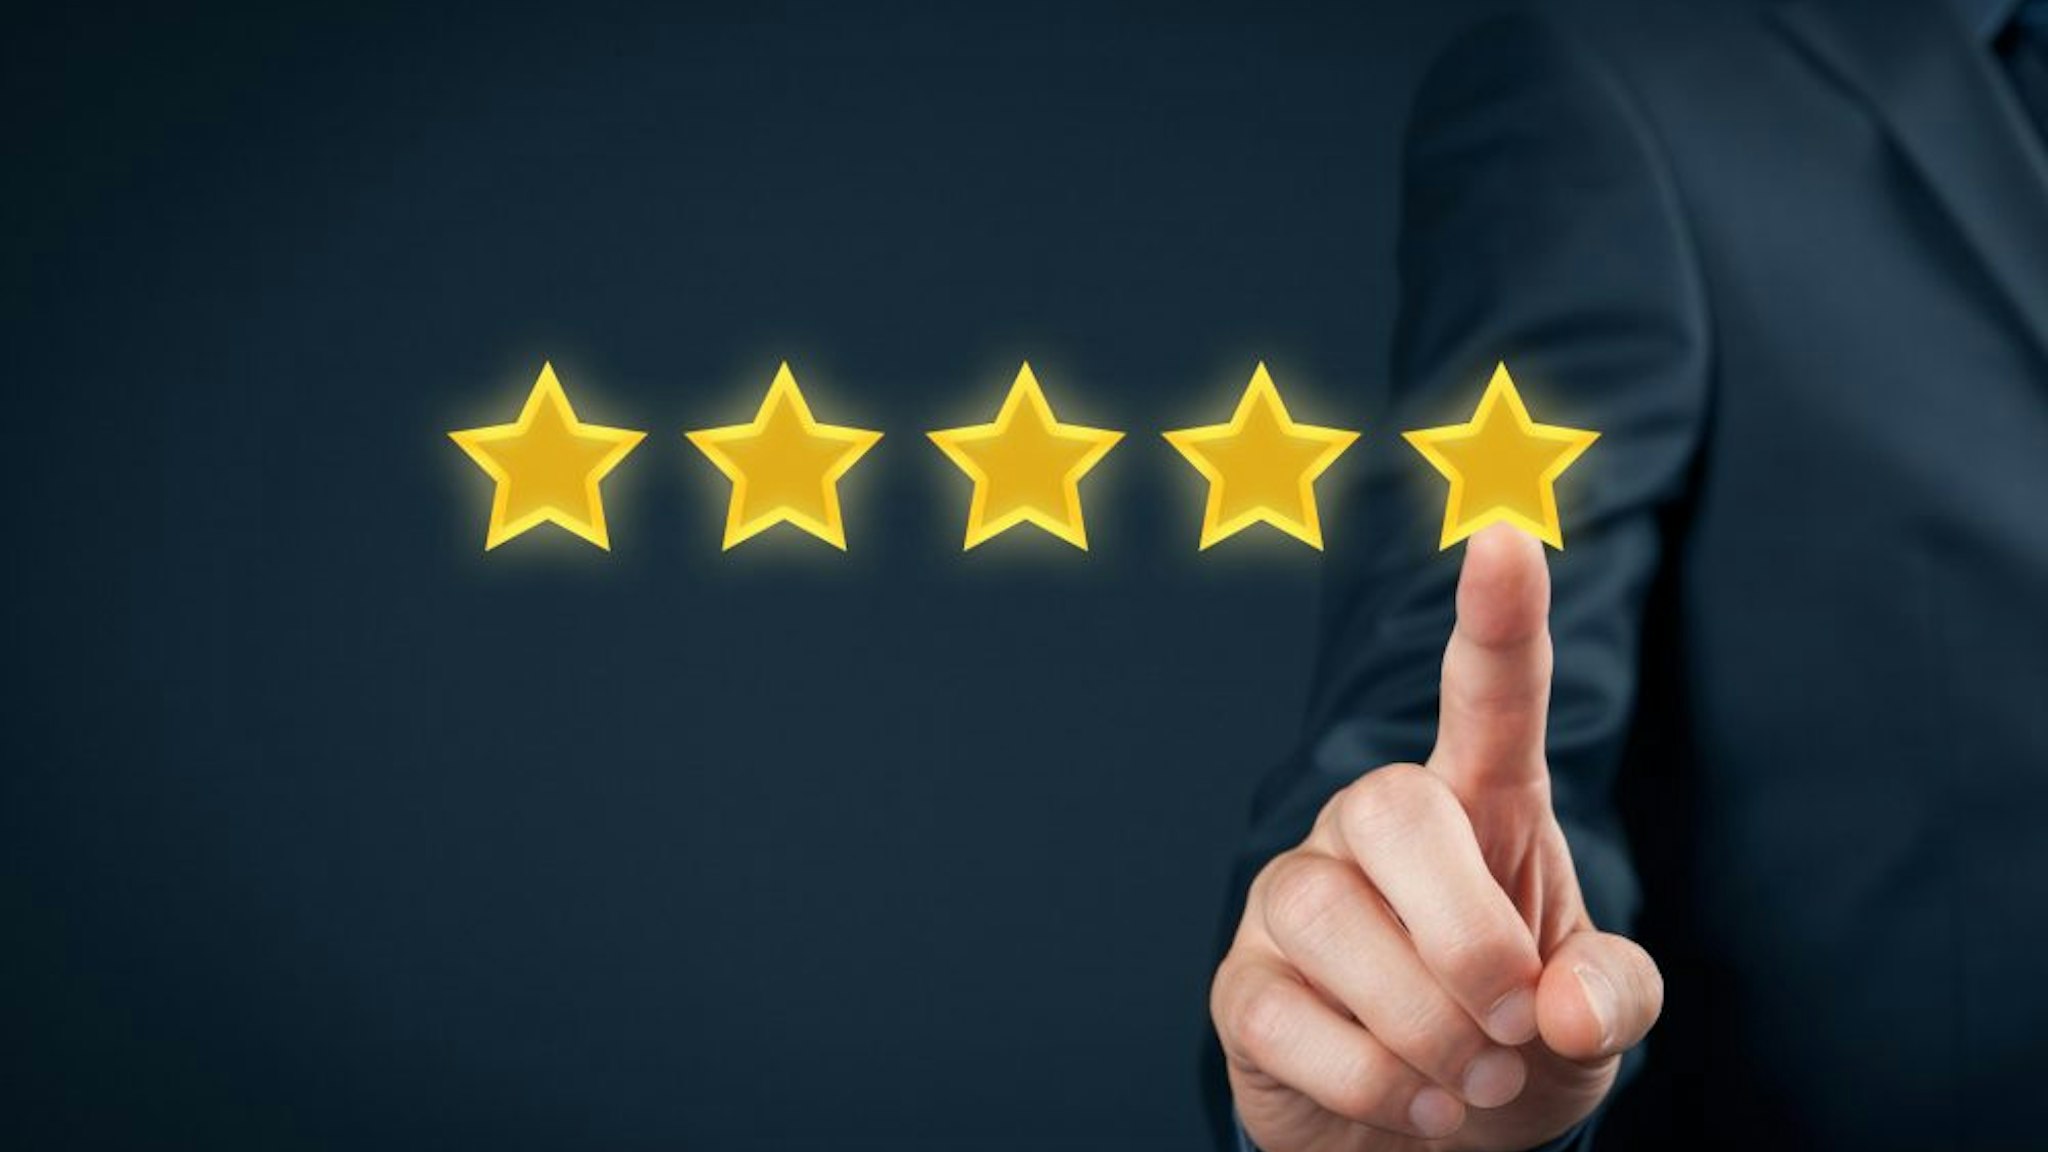 Review, increase rating or ranking, evaluation and classification concept. Businessman click on five yellow stars to increase rating of his company."